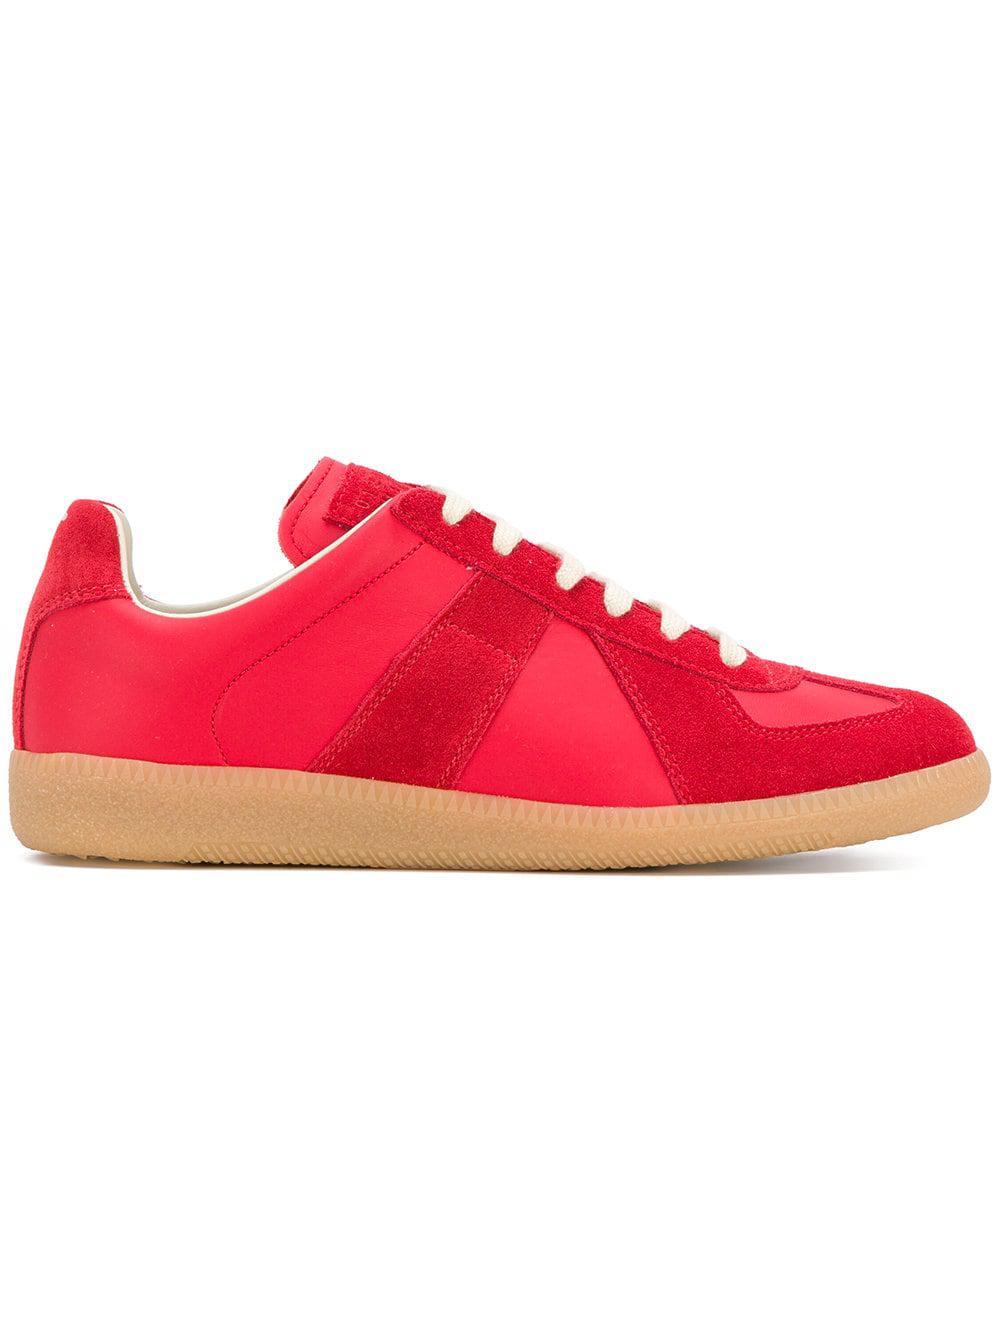 Maison Margiela Leather Replica Sneakers in Red - Lyst